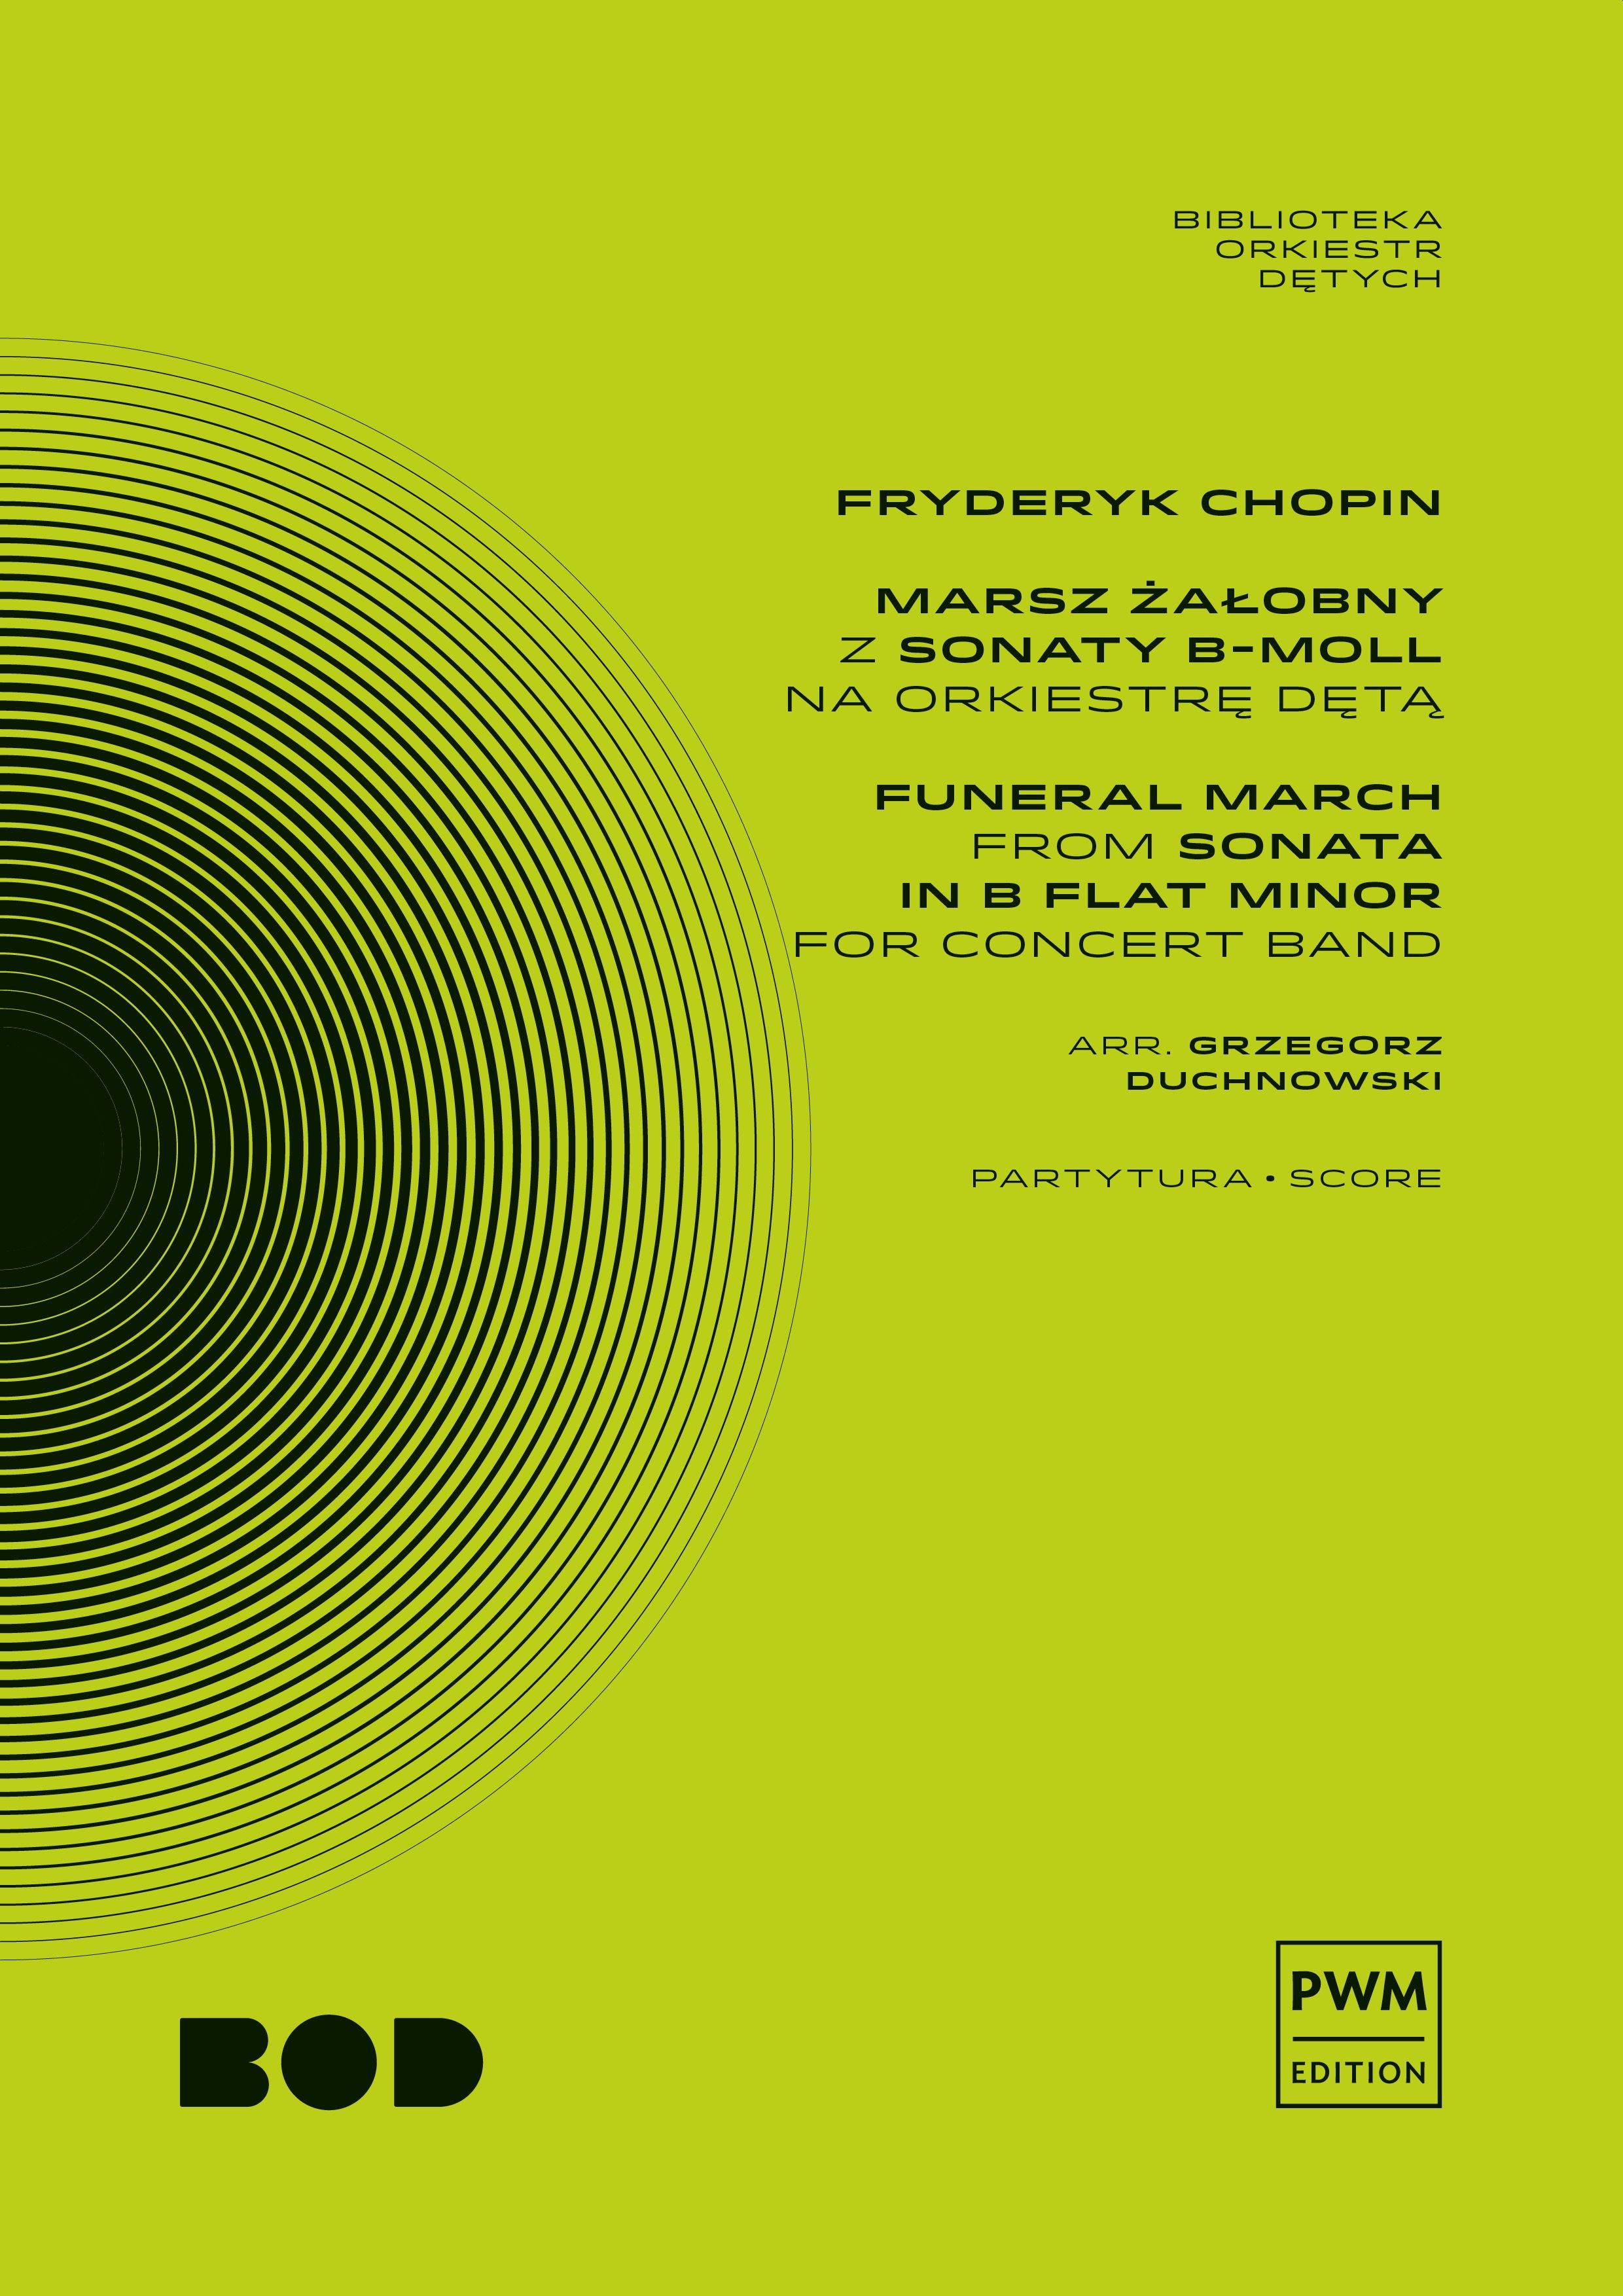 Frdric Chopin: Funeral March From Sonata In B Flat Minor: Concert Band: Score